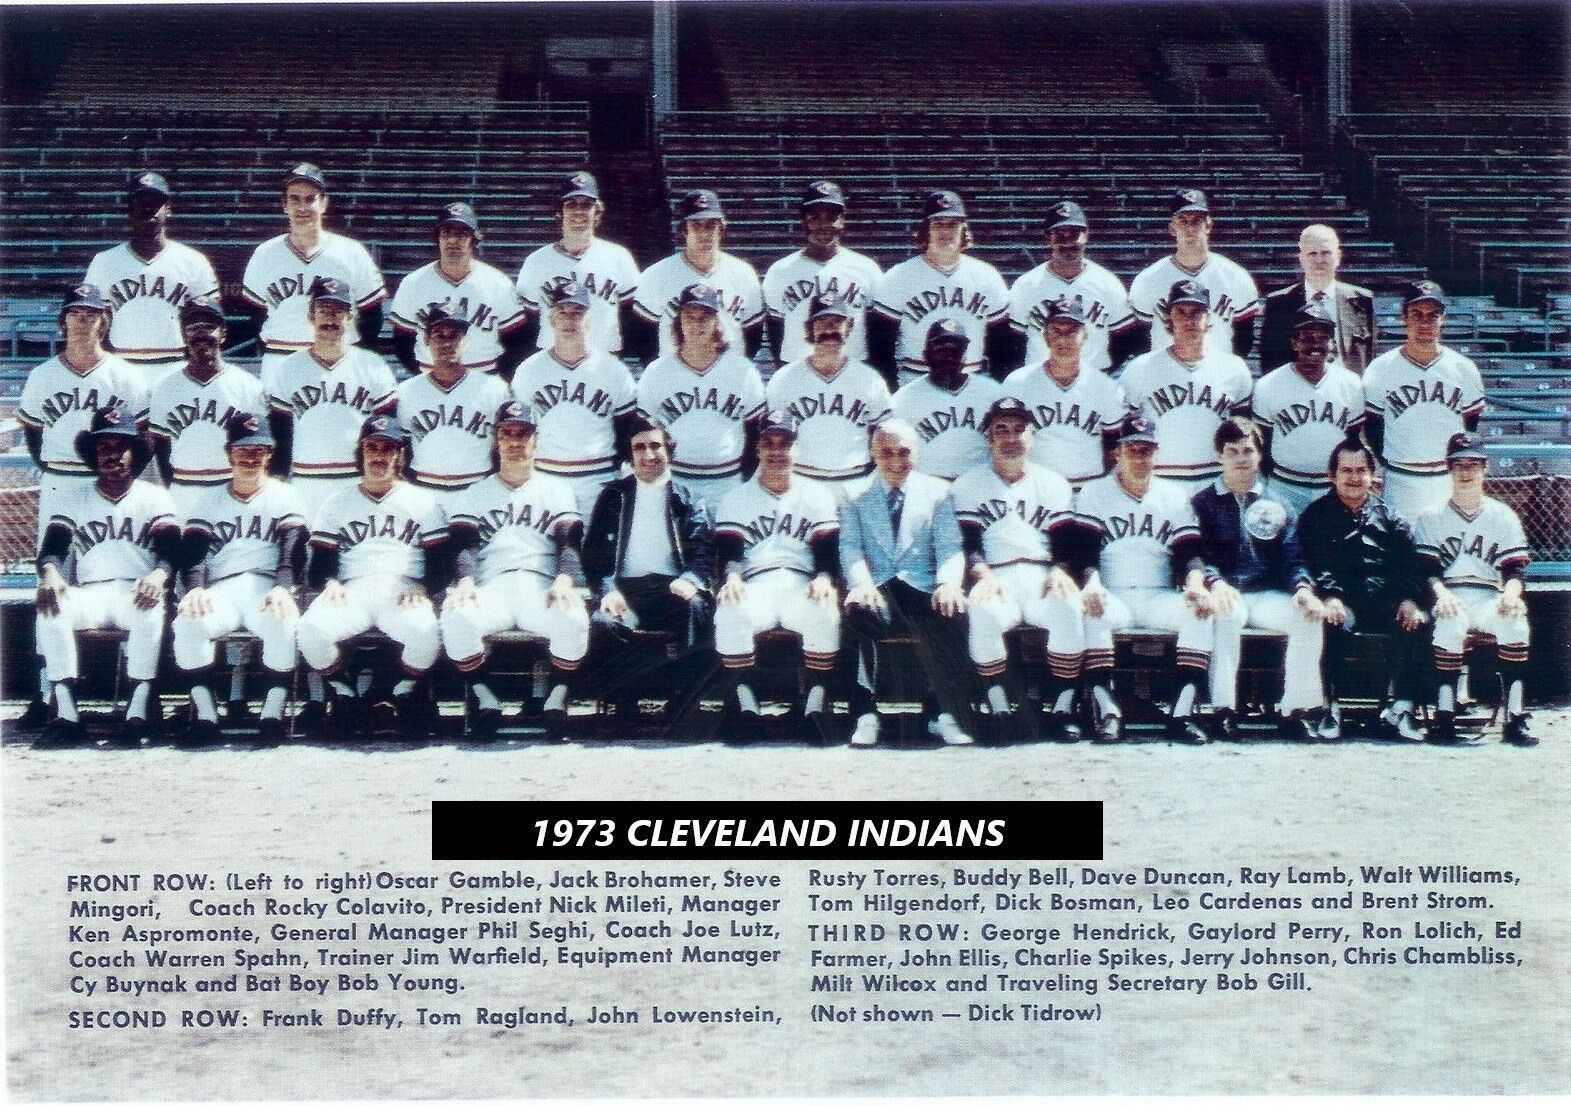 Primary image for 1973 CLEVELAND INDIANS 8X10 TEAM PHOTO BASEBALL PICTURE MLB